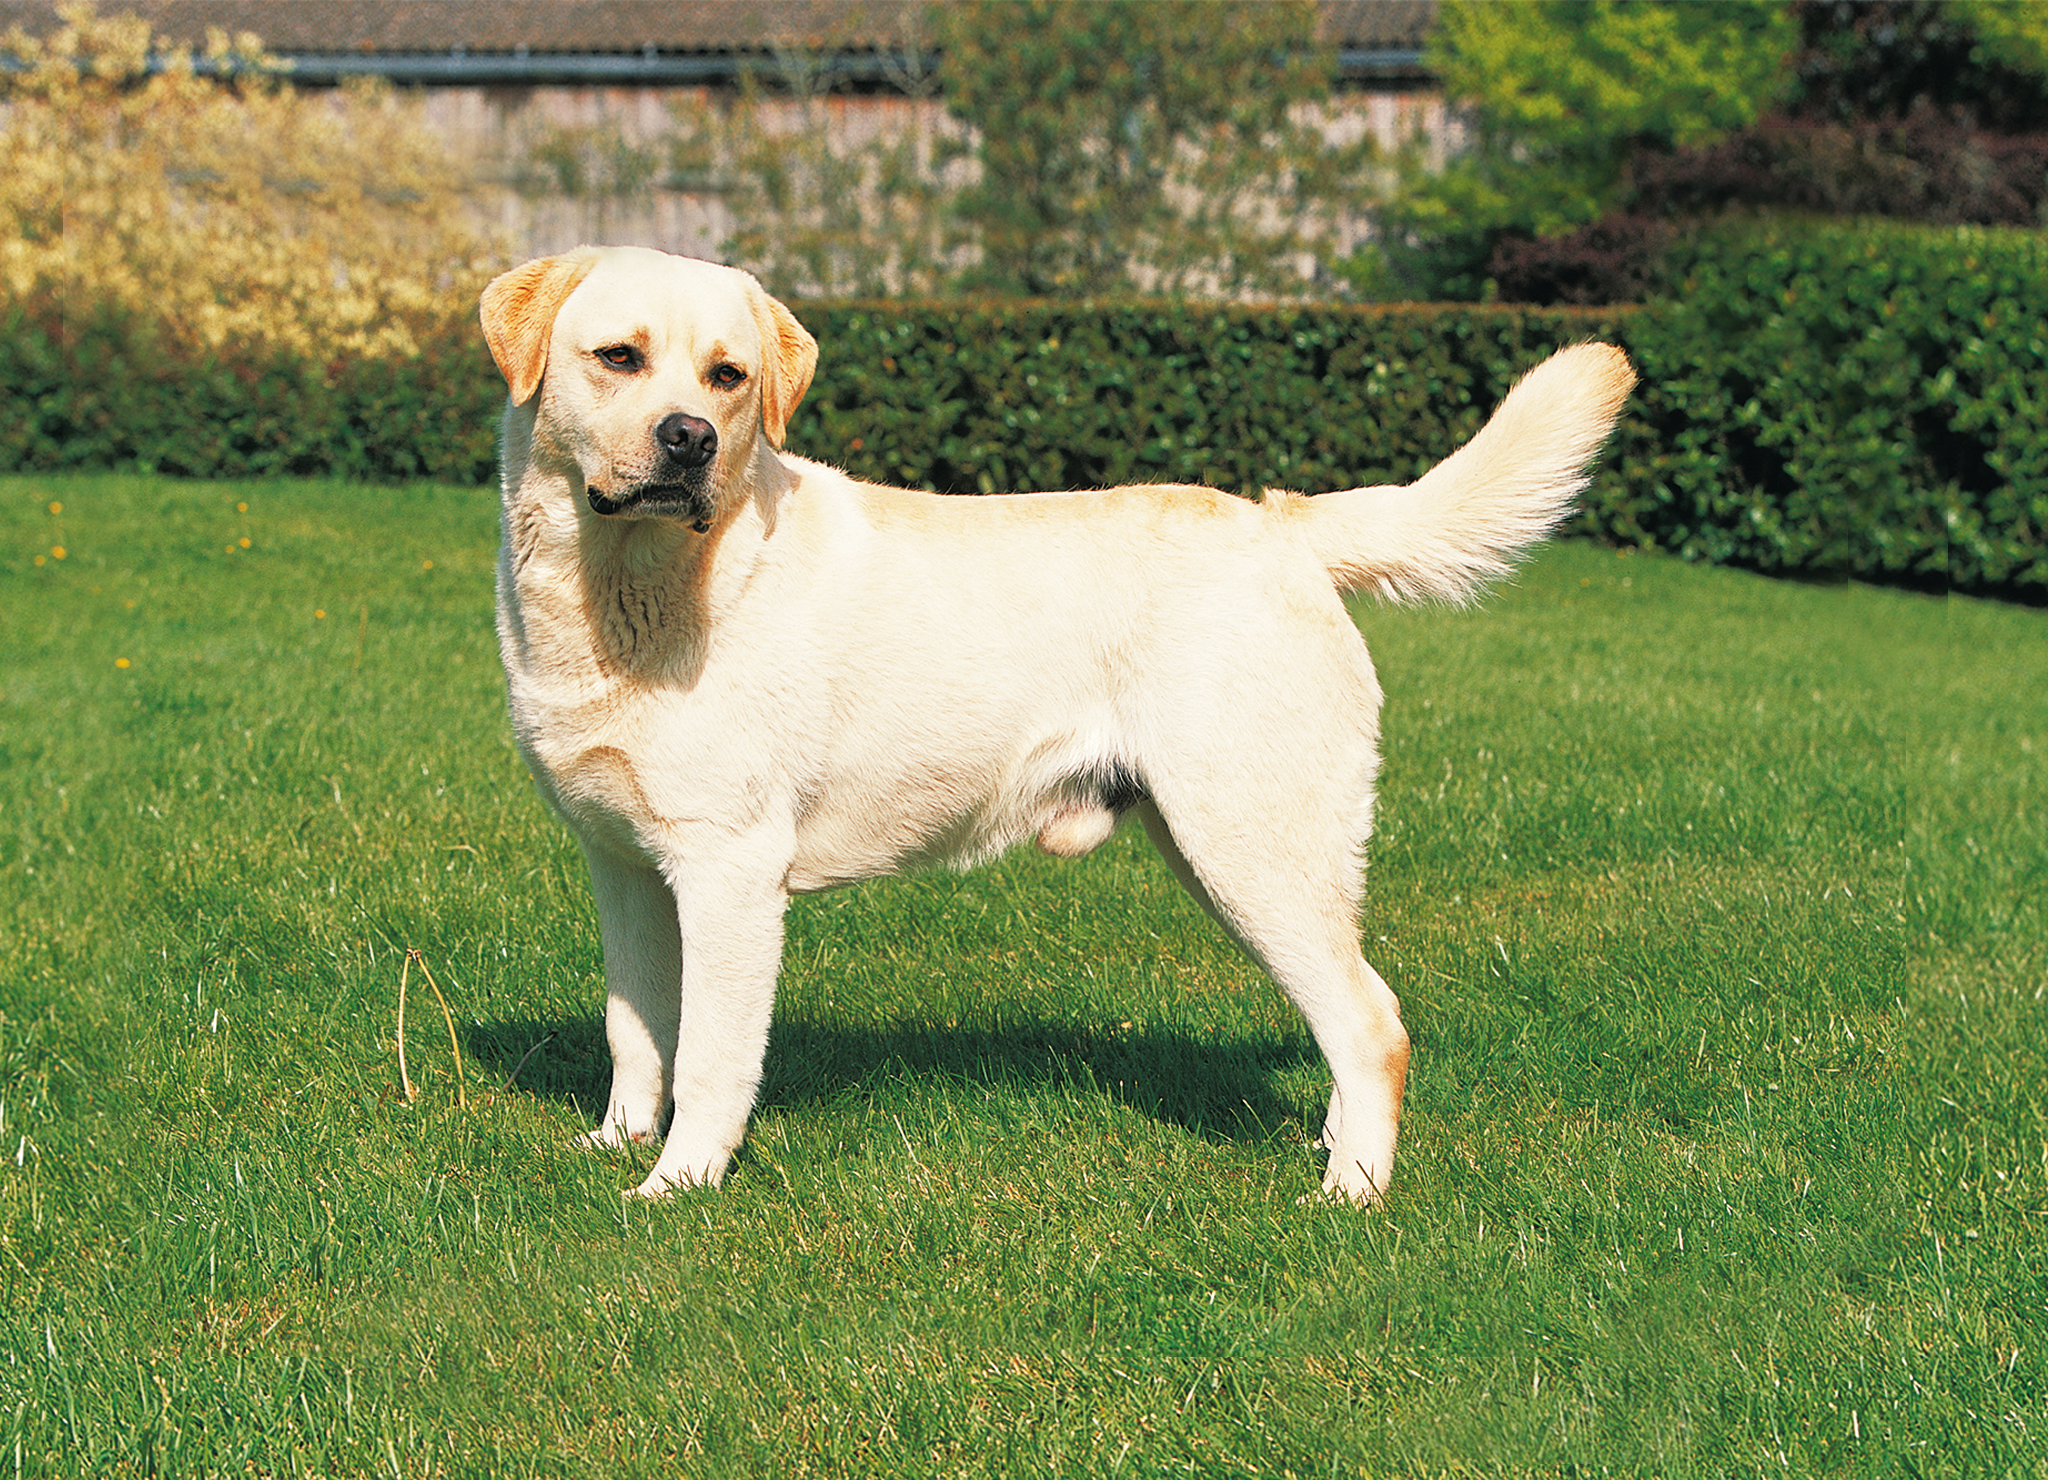 A yellow Labrador Retriever standing in the yard at the park